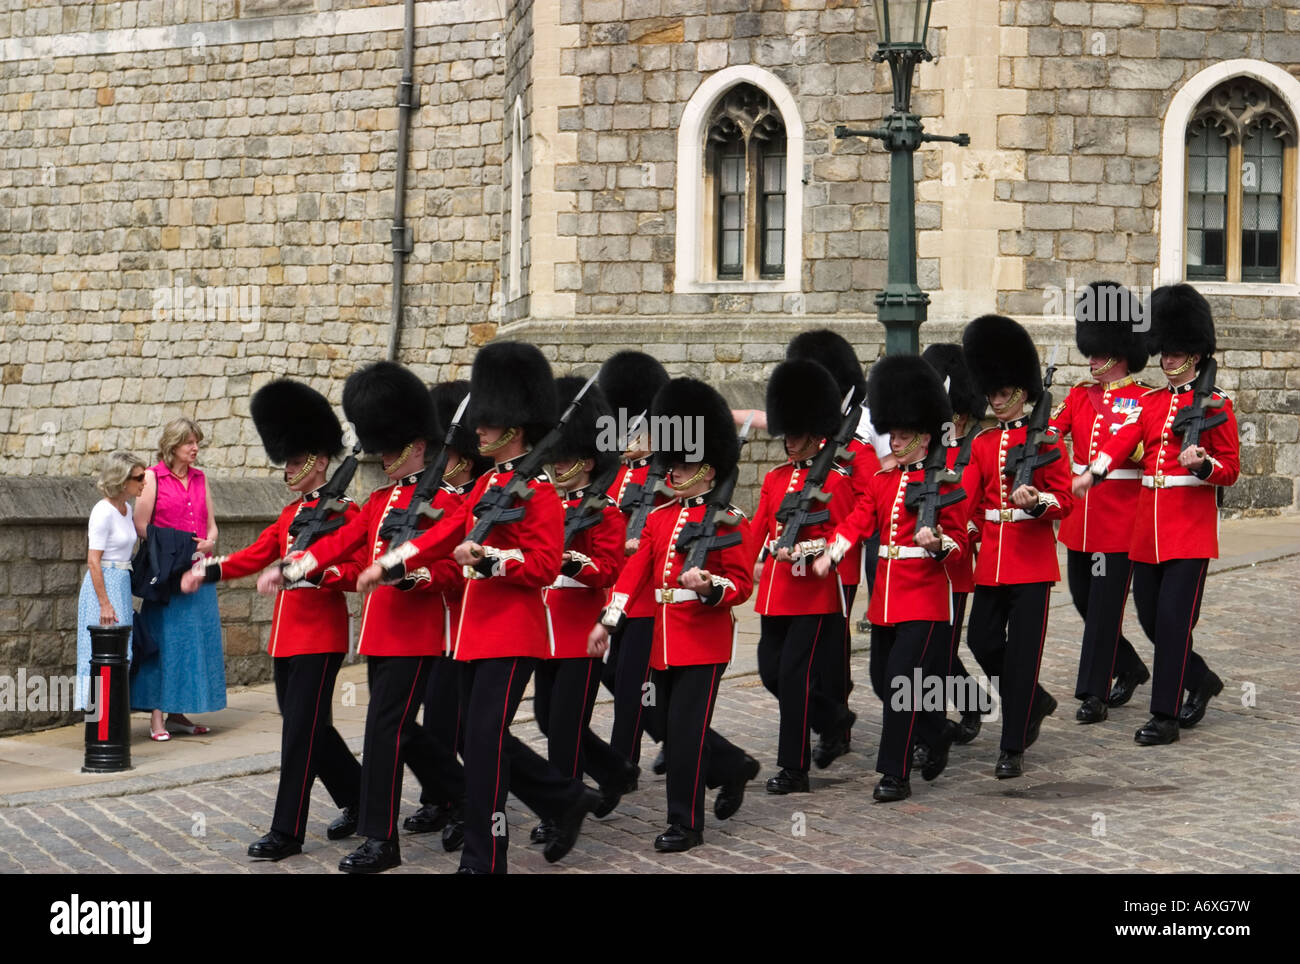 ENGLAND Windsor Changing of the Queens guard marching down cobblestone street red coats women tourists watch Stock Photo